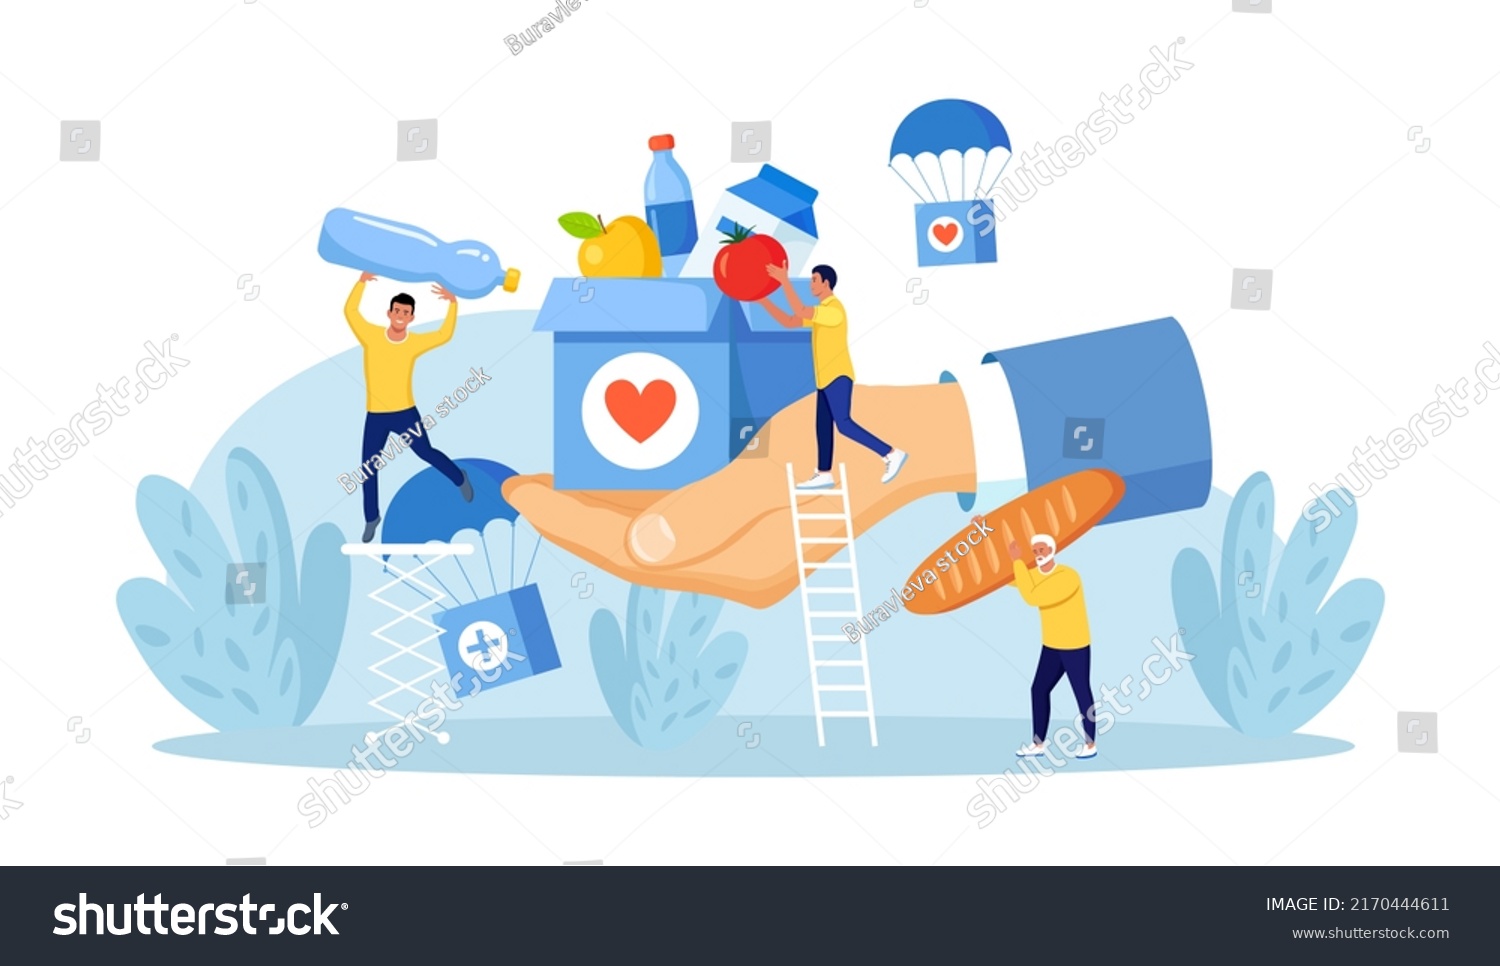 SVG of Humanitarian Aid, Food Donation for Poor People, Refugees. Team of Volunteers Collecting Help Boxes to Shelters, Filling Cardboard Donation Box with Products, Groceries. Charity People Sharing Food svg